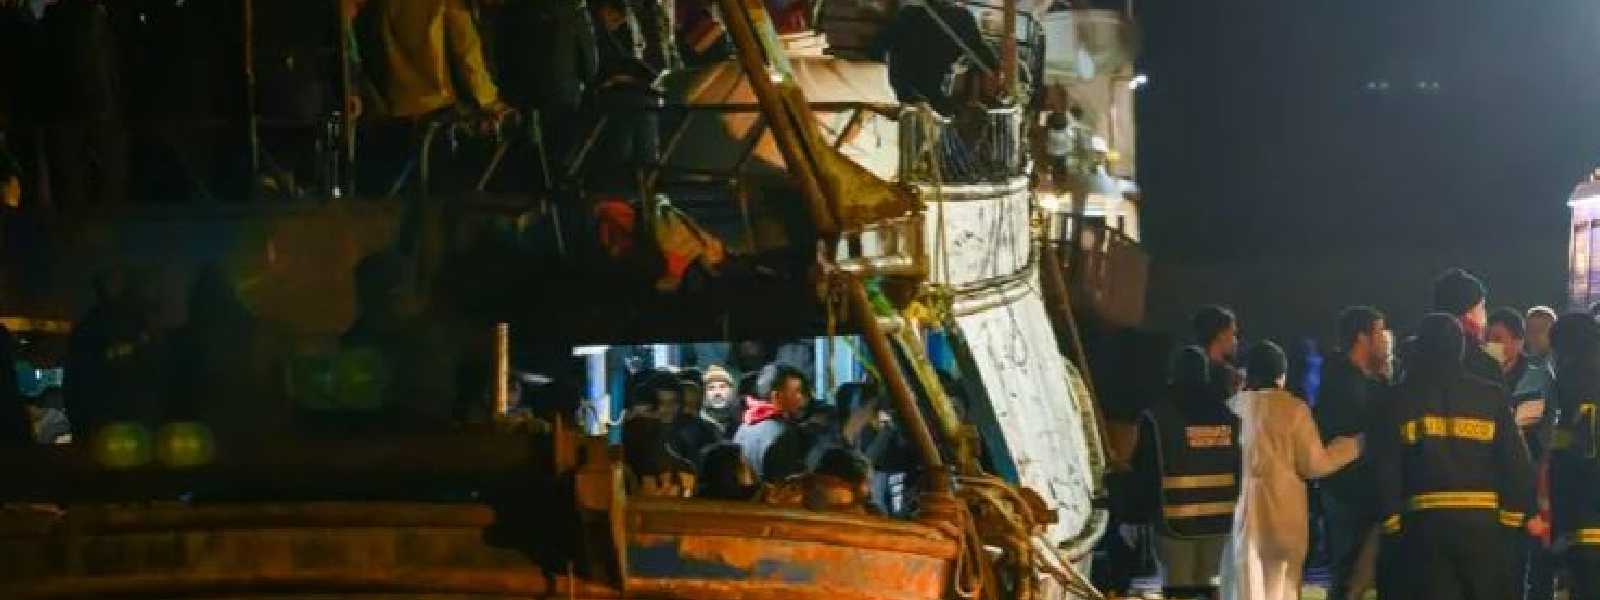 1000+ refugees rescued in Italy waters